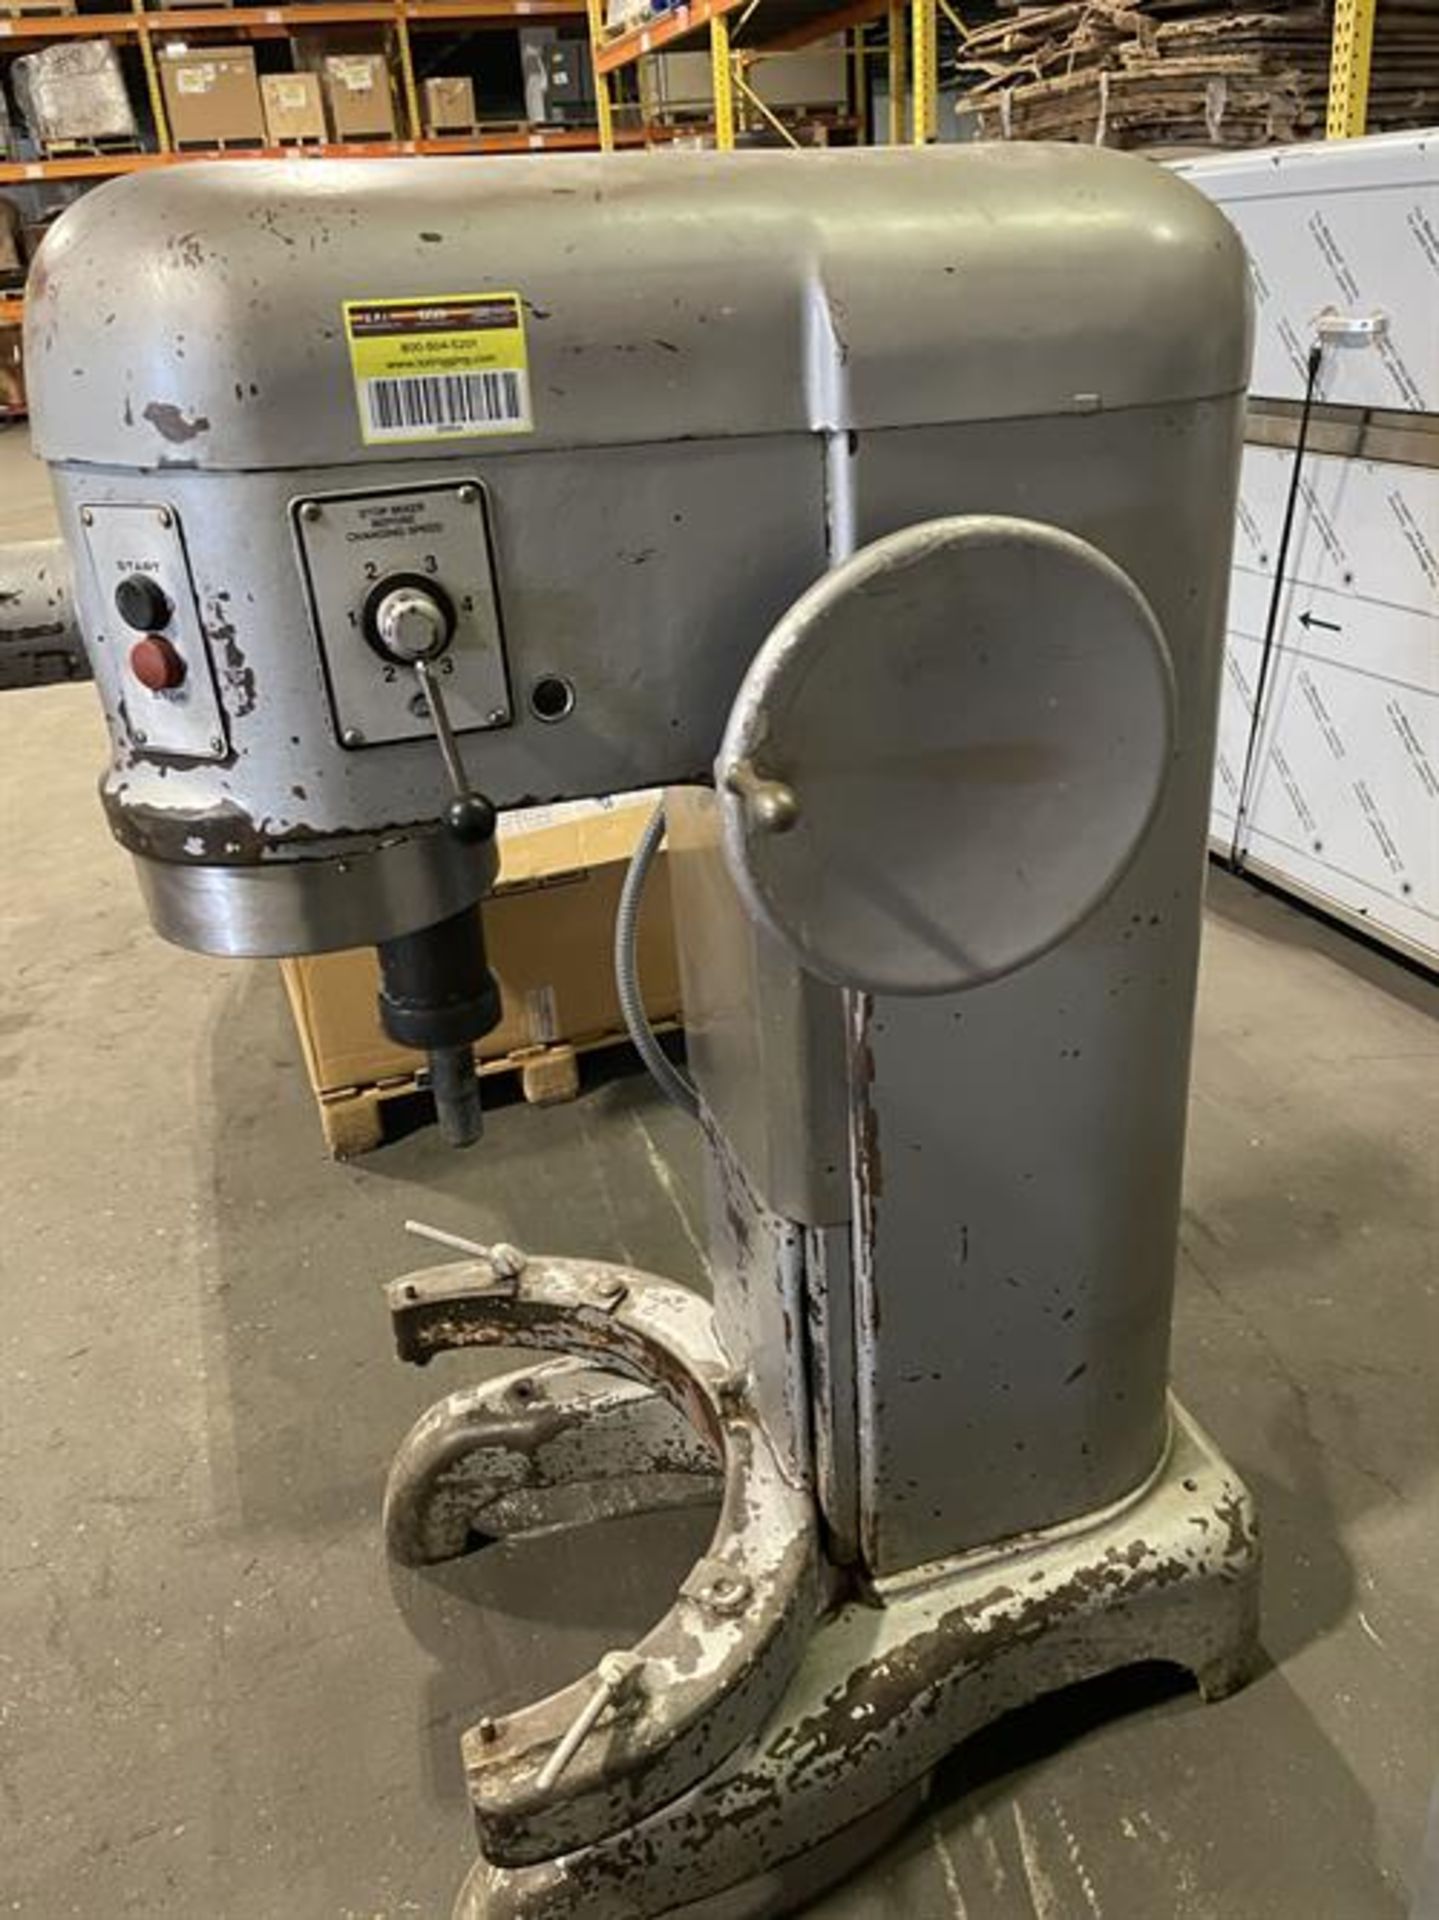 Hobart L800 80-Qt Mixer - 4 speed - Manual bowl lift - Sold without bowl and beater - Serial#1125362 - Image 3 of 4